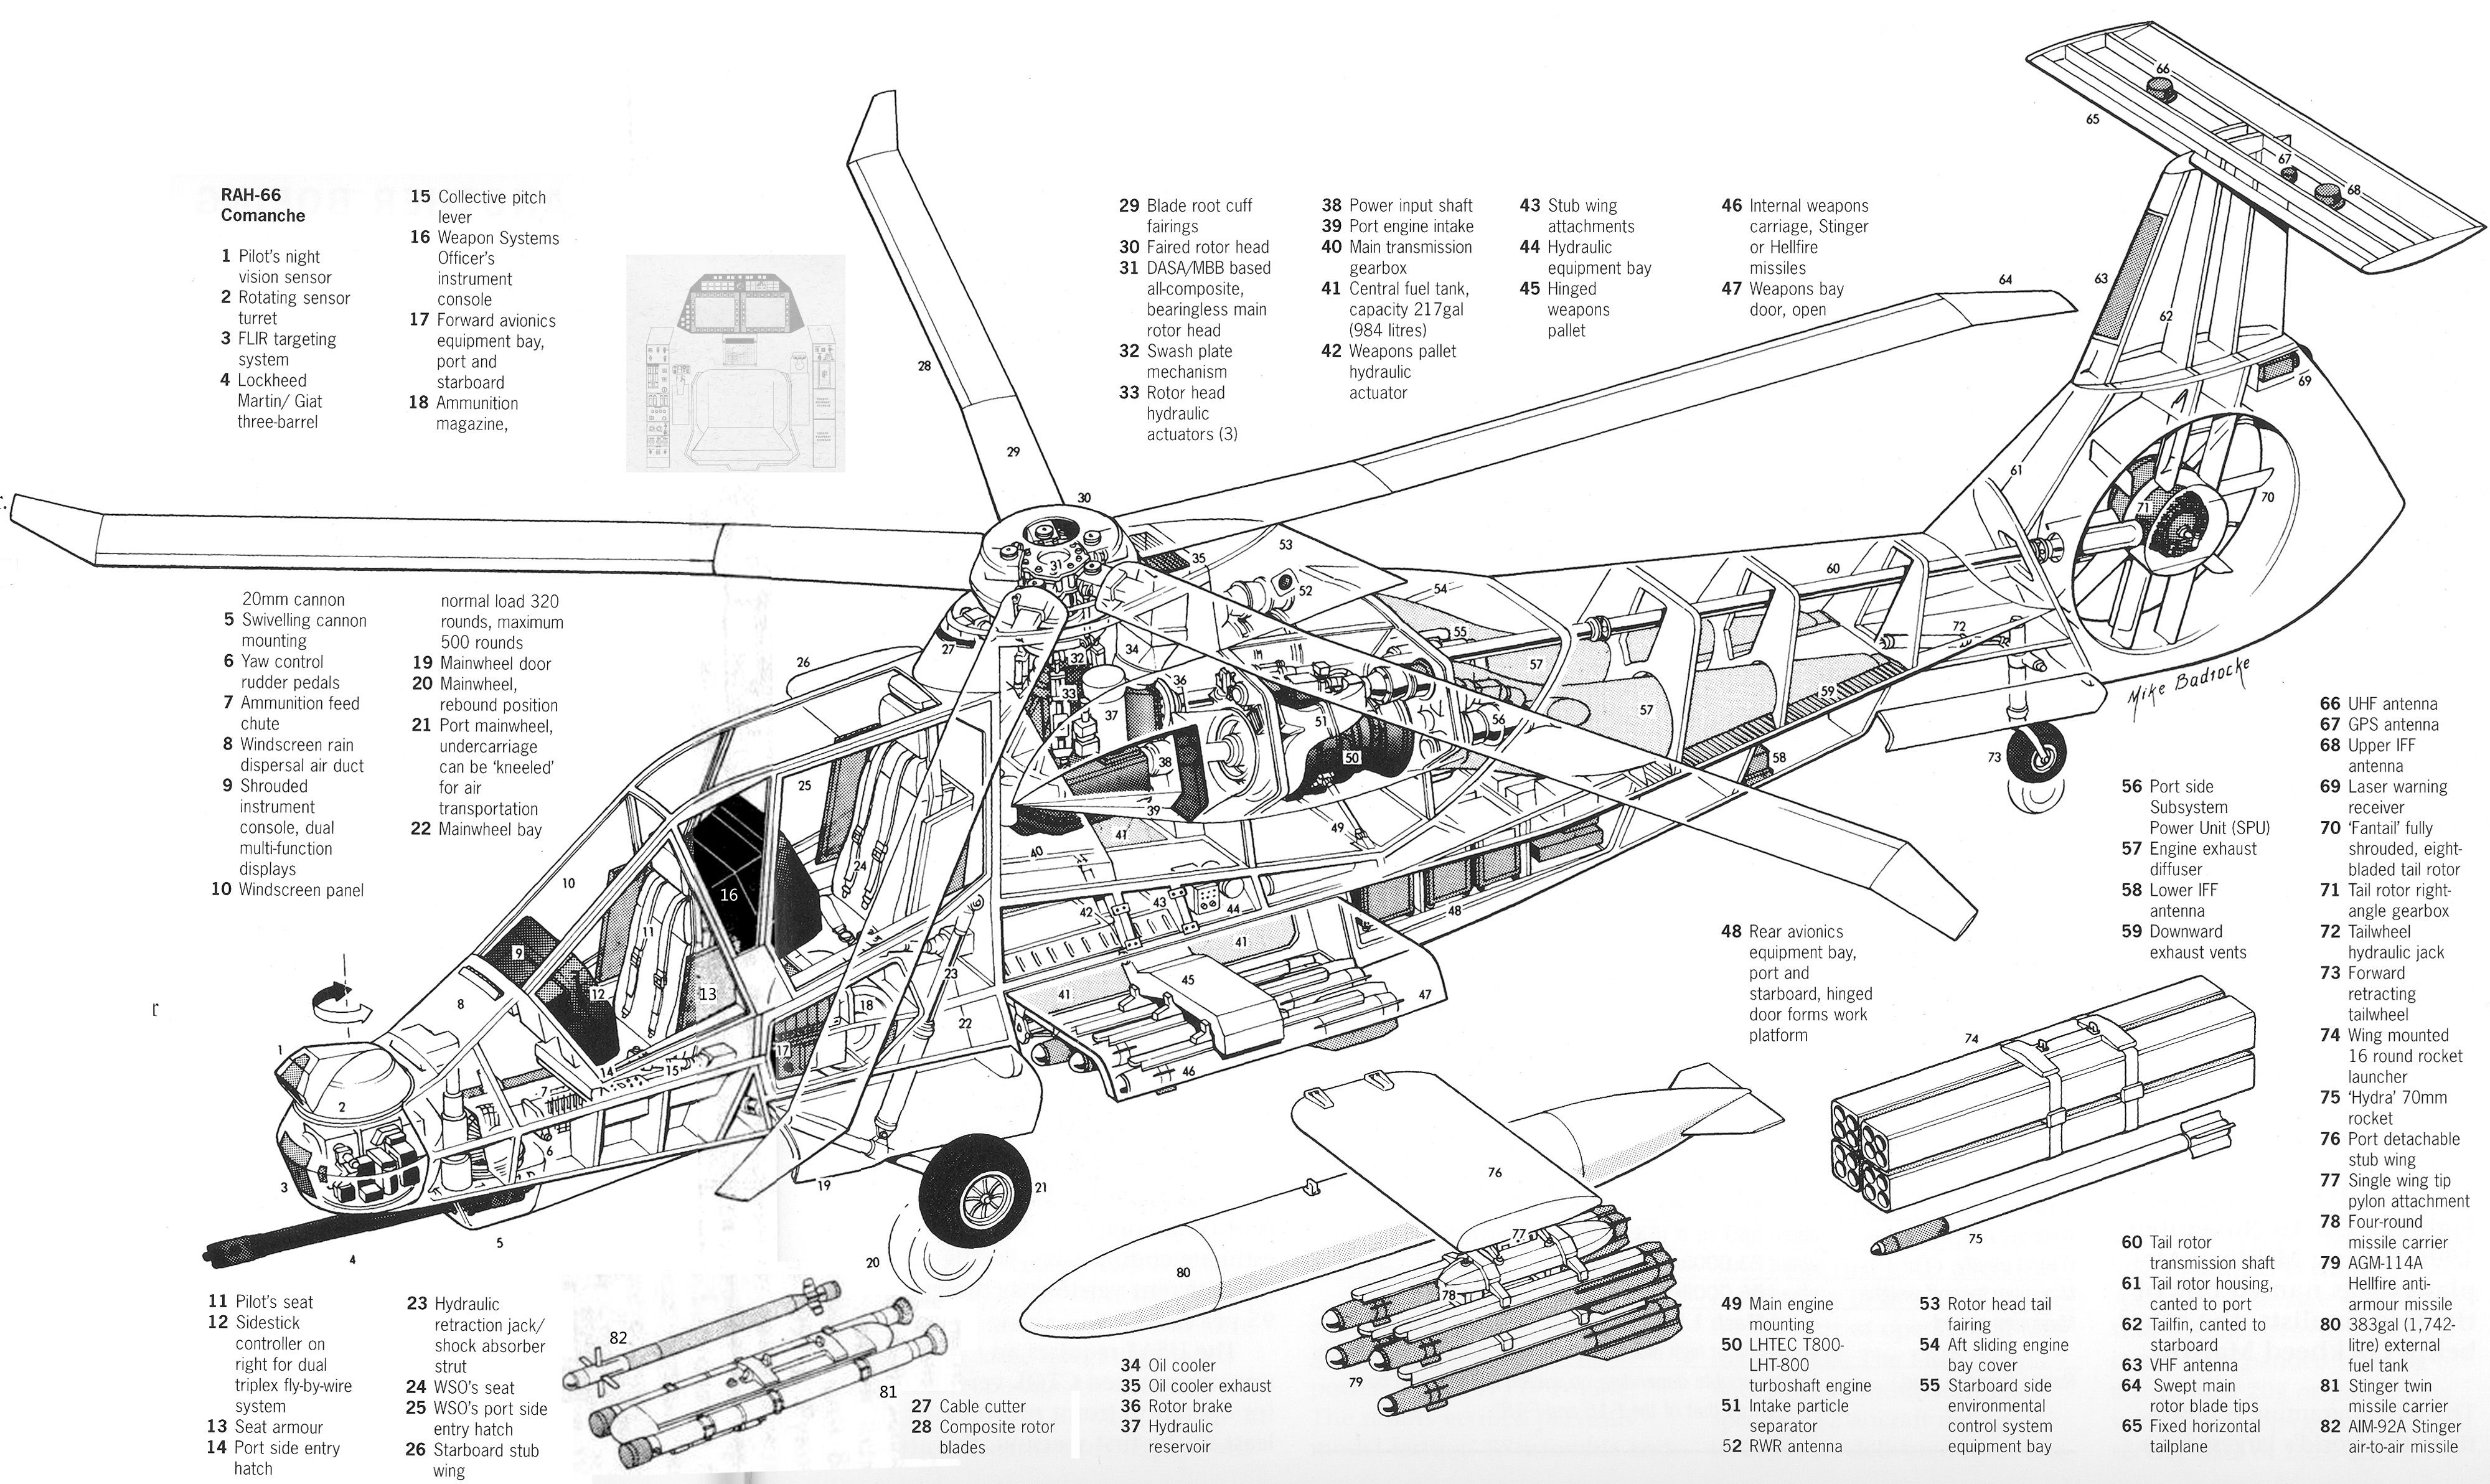 Boeing-Sikorsky_RAH-66_Comanche